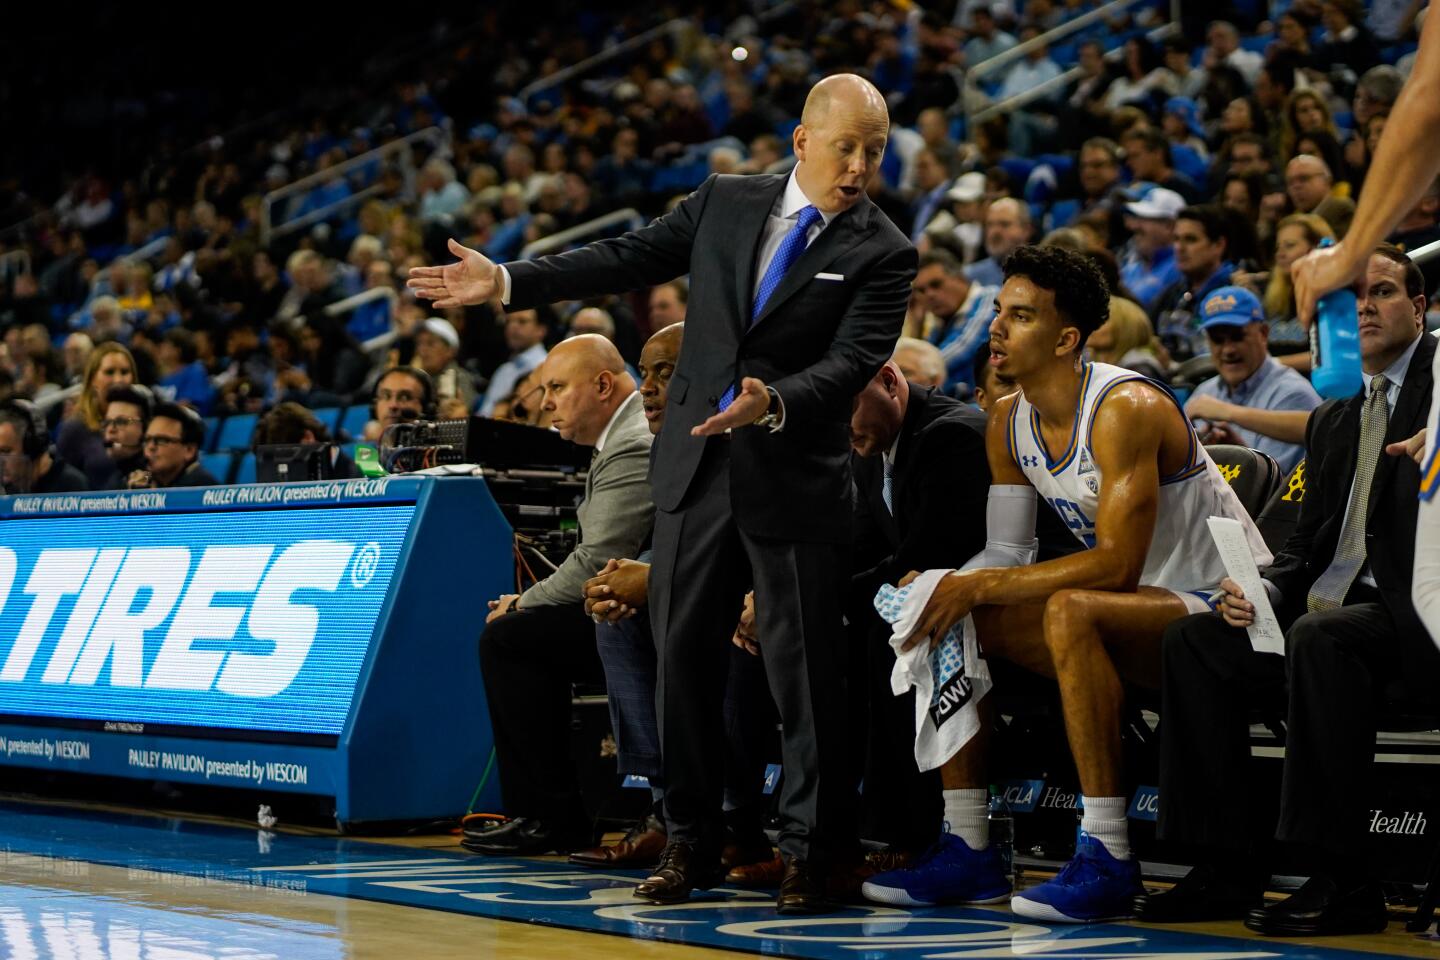 LOS ANGELES, CALIF. - NOVEMBER 06: UCLA Bruins head coach Mick Cronin talks with guard Chris Smith (5) during the second half of a NCAA basketball game between the UCLA Bruins and the Long Beach State 49ers at UCLA Pauley Pavillion on Wednesday, Nov. 6, 2019 in Los Angeles, Calif. (Kent Nishimura / Los Angeles Times)